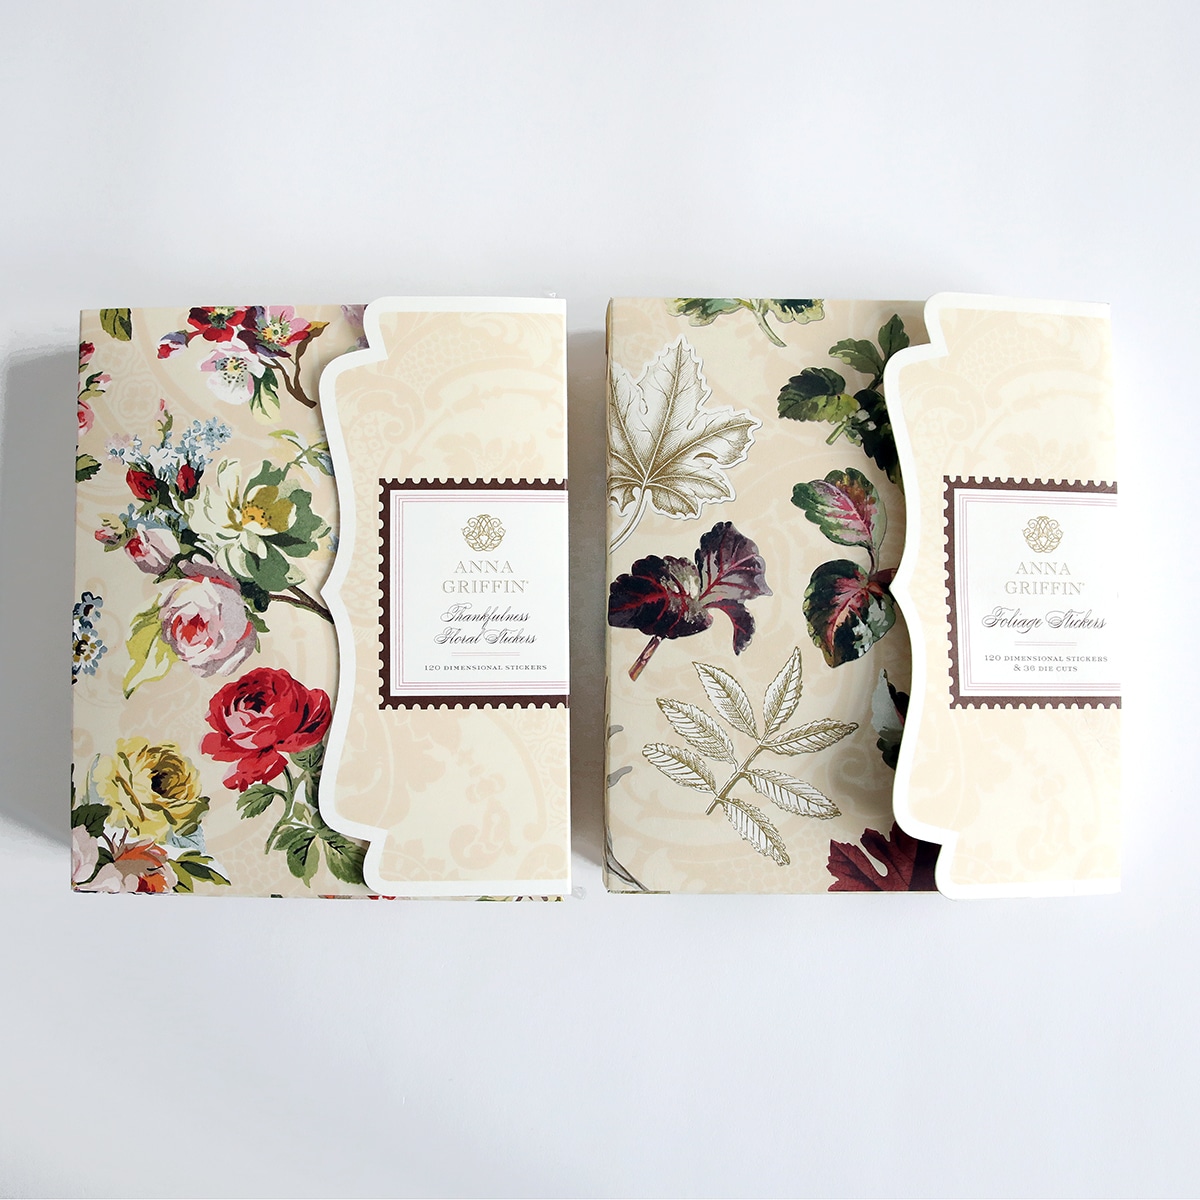 Two boxes with floral designs on them.